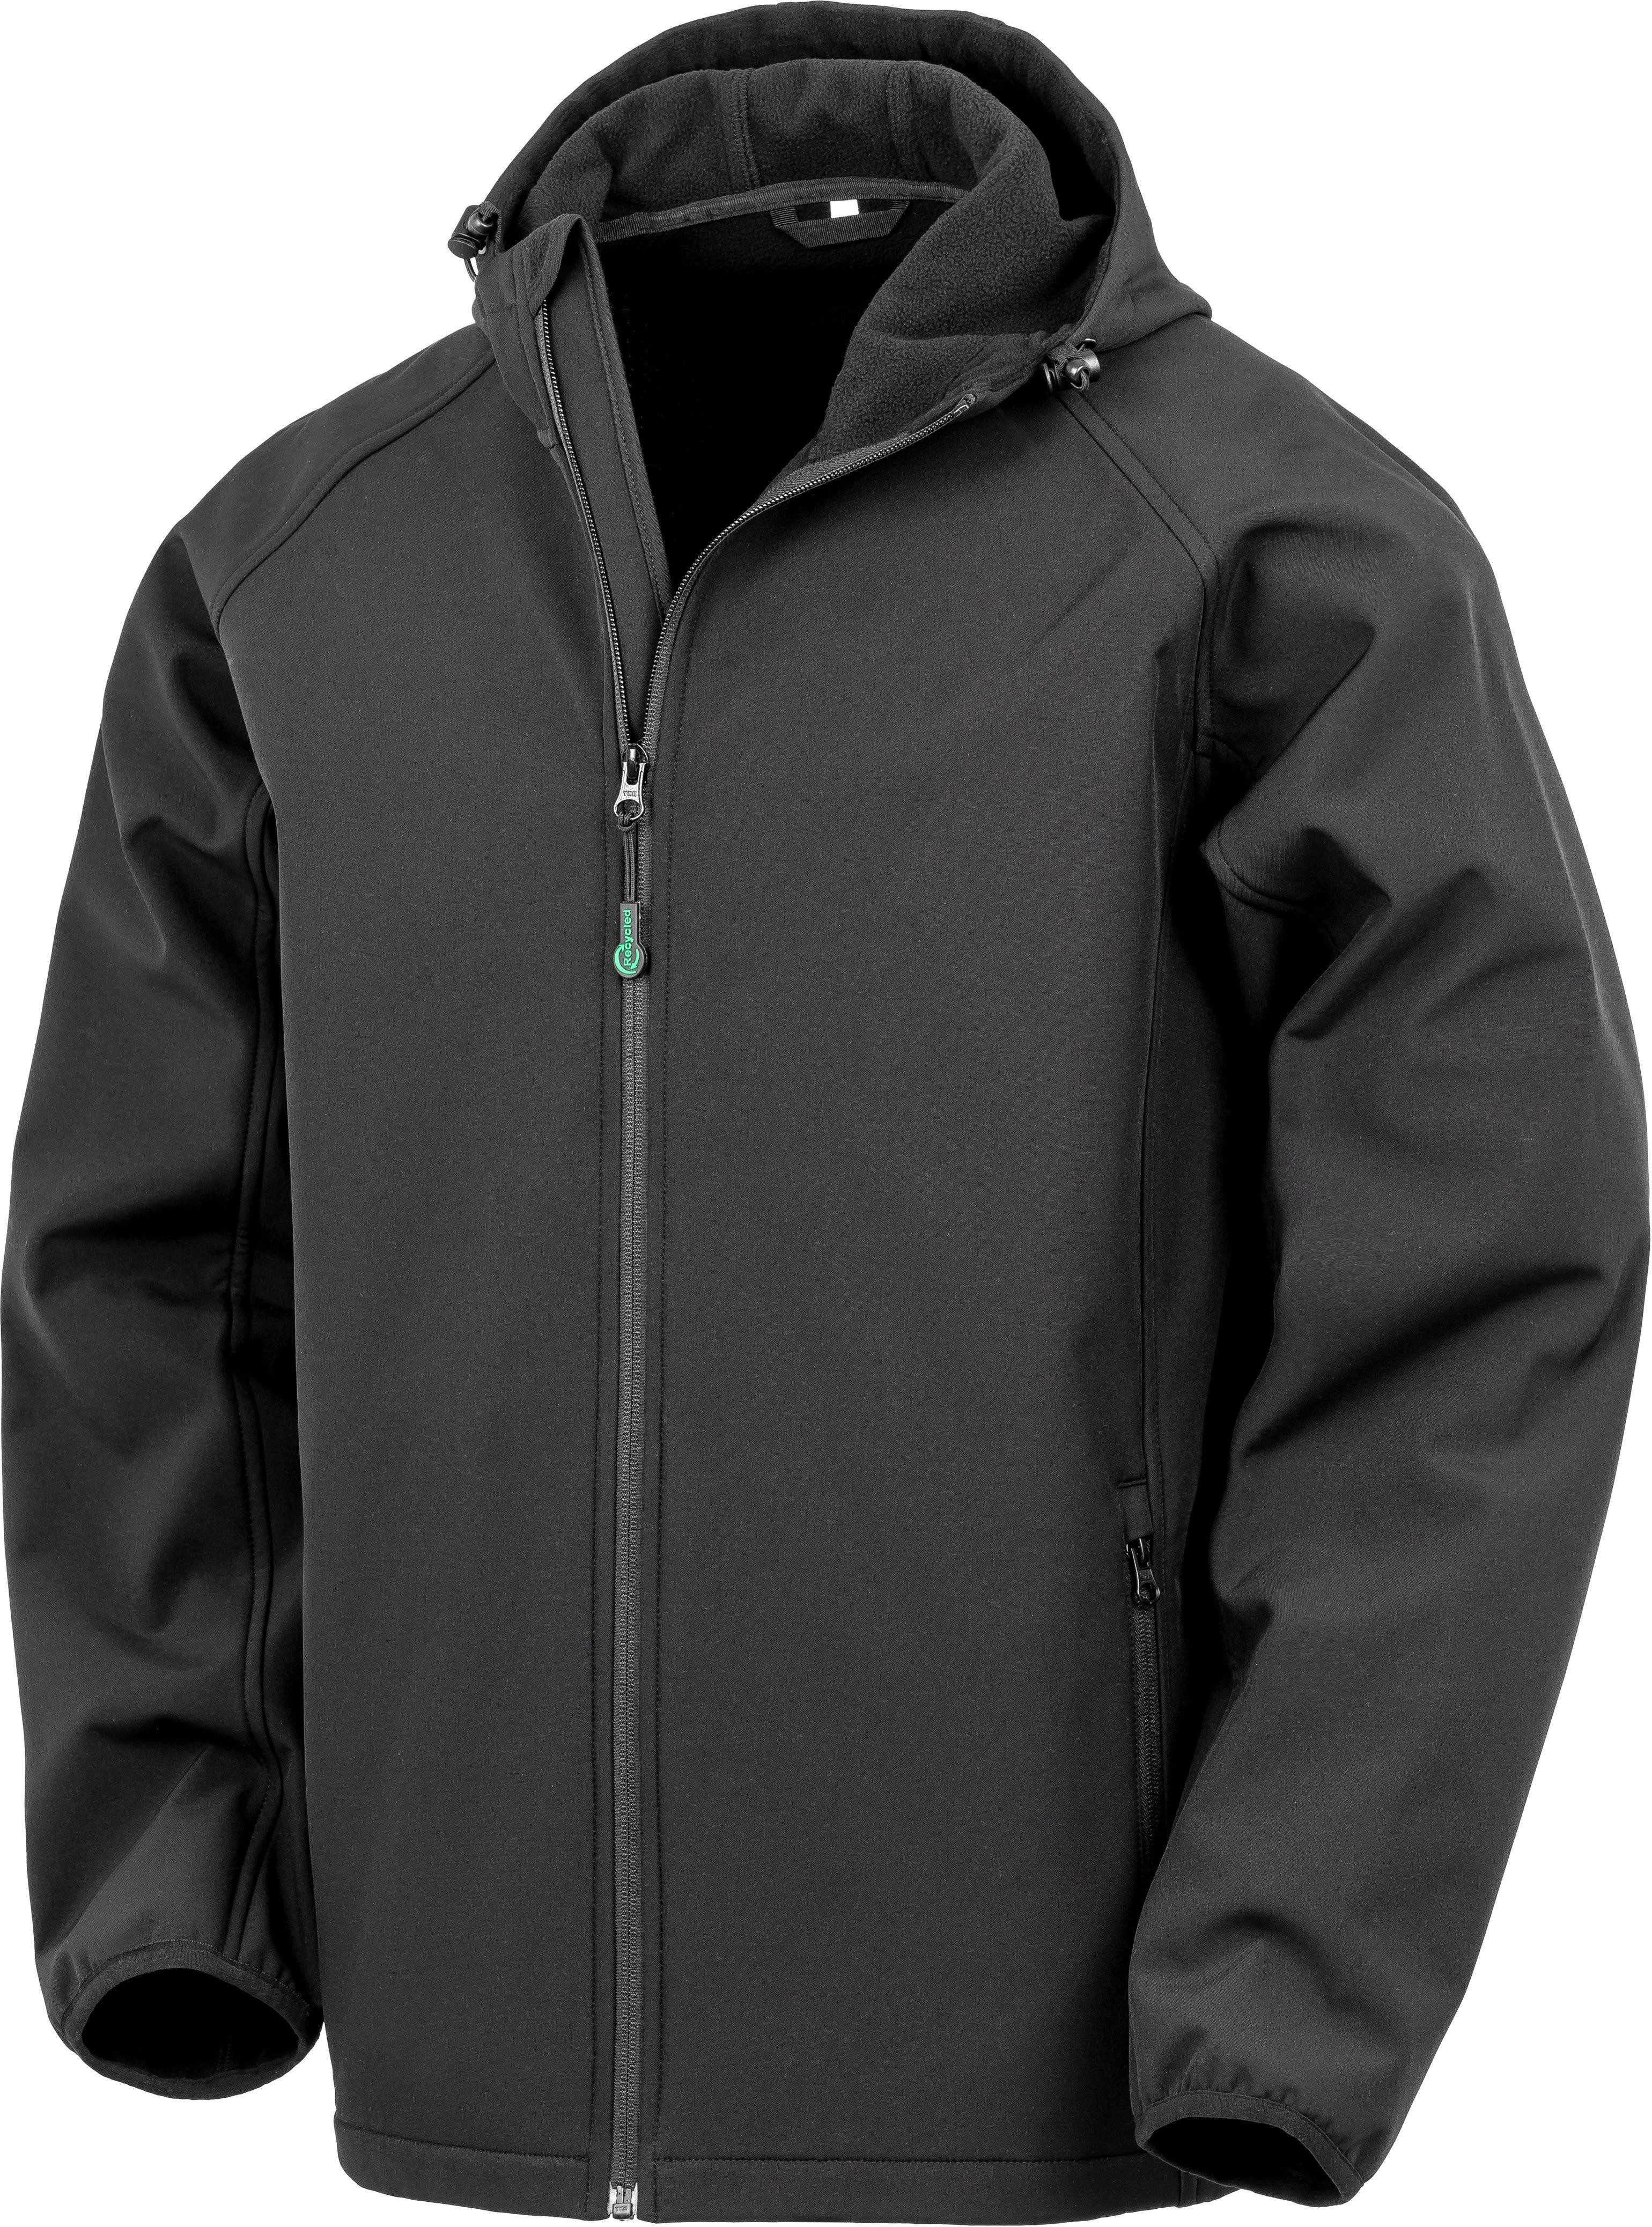 Result Outdoorjacke Men´s Recycled 3-Layer Printable Hooded Softshell Jacket